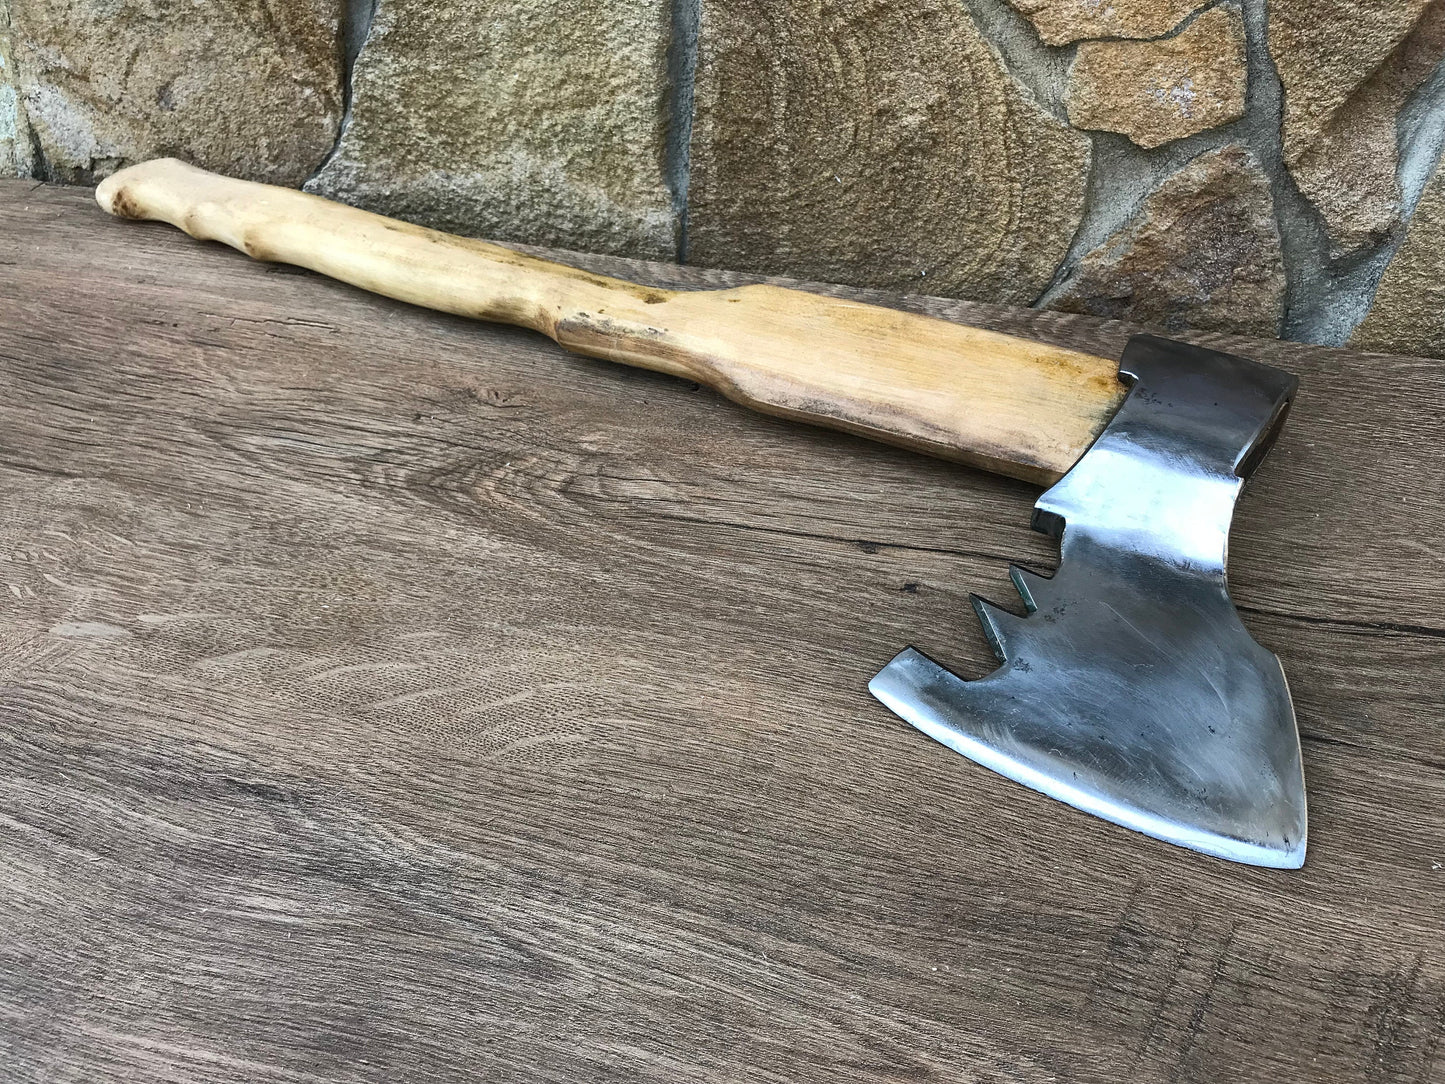 Viking axe, viking hatchet, medieval axe, camping,hunting, mens gifts, iron gift for him, anniversary gift,gifts for men, manly iron gifts